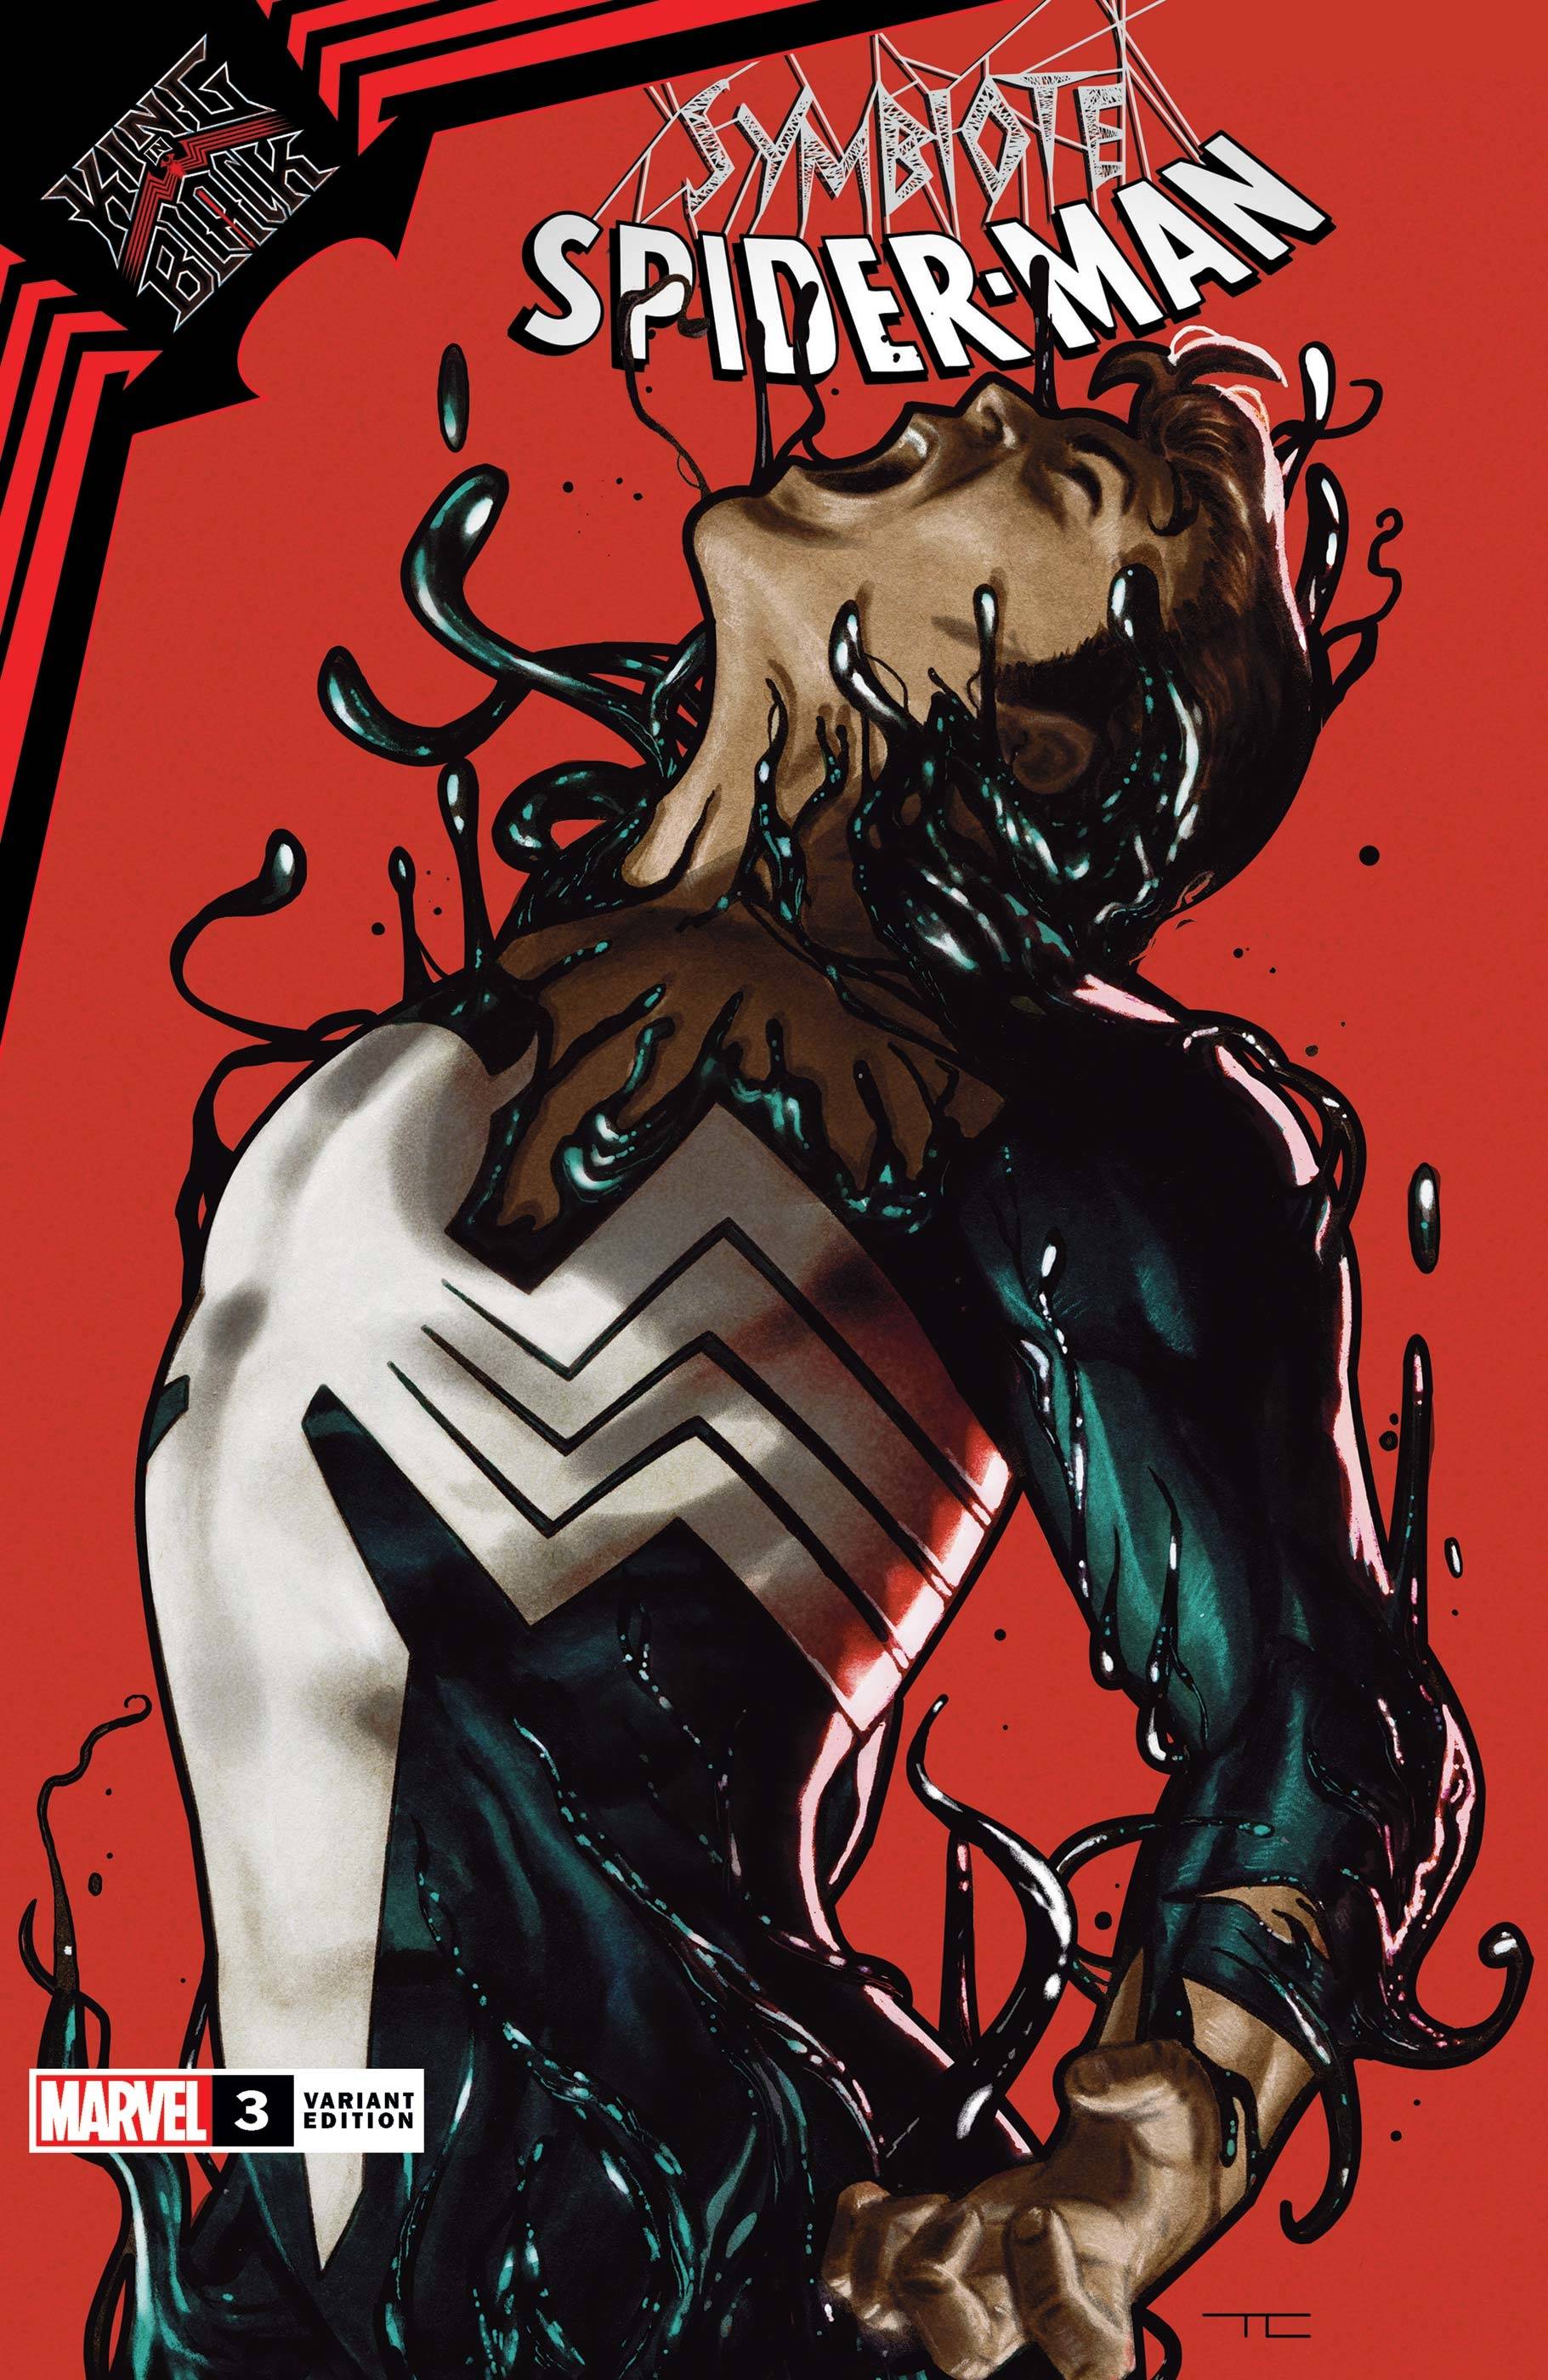 Symbiote Spider-Man King In Black #3 Shalvey Variant (Of 5)